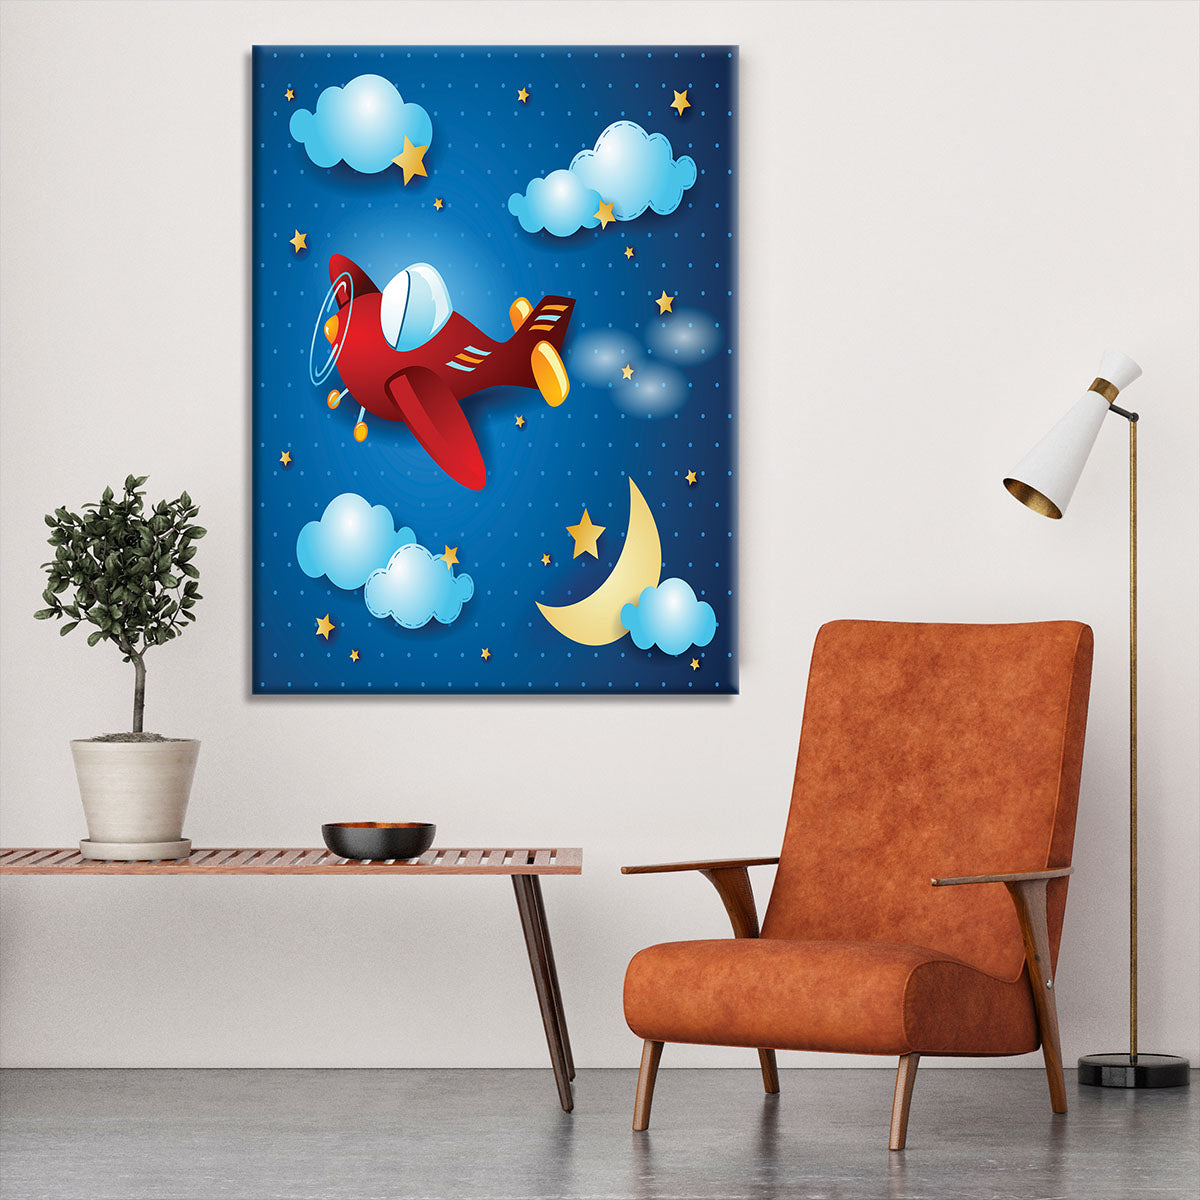 Retro airplane by night Canvas Print or Poster - Canvas Art Rocks - 6